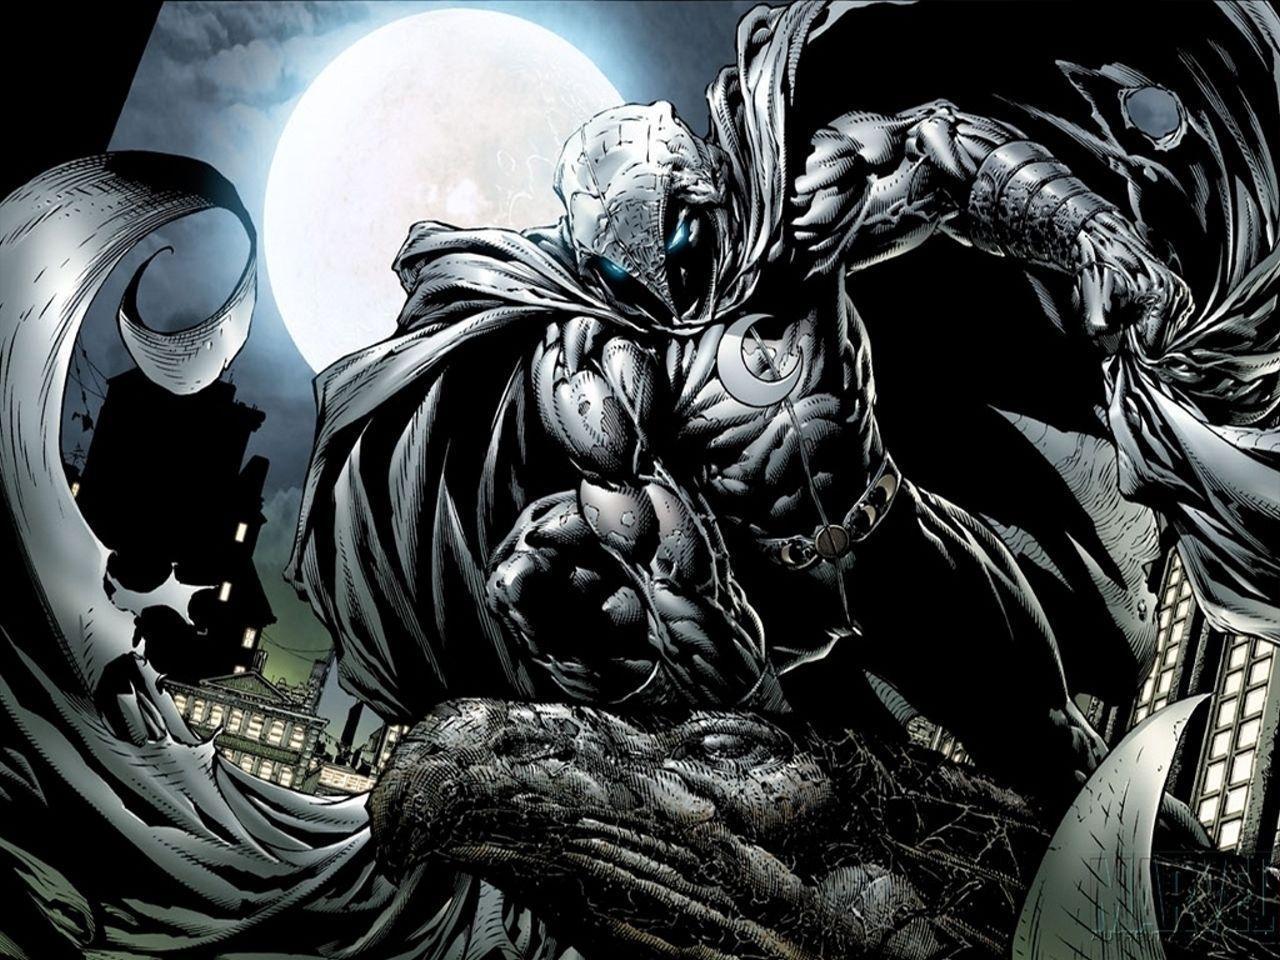 Marvel Comics image Moon Knight HD wallpapers and backgrounds photos